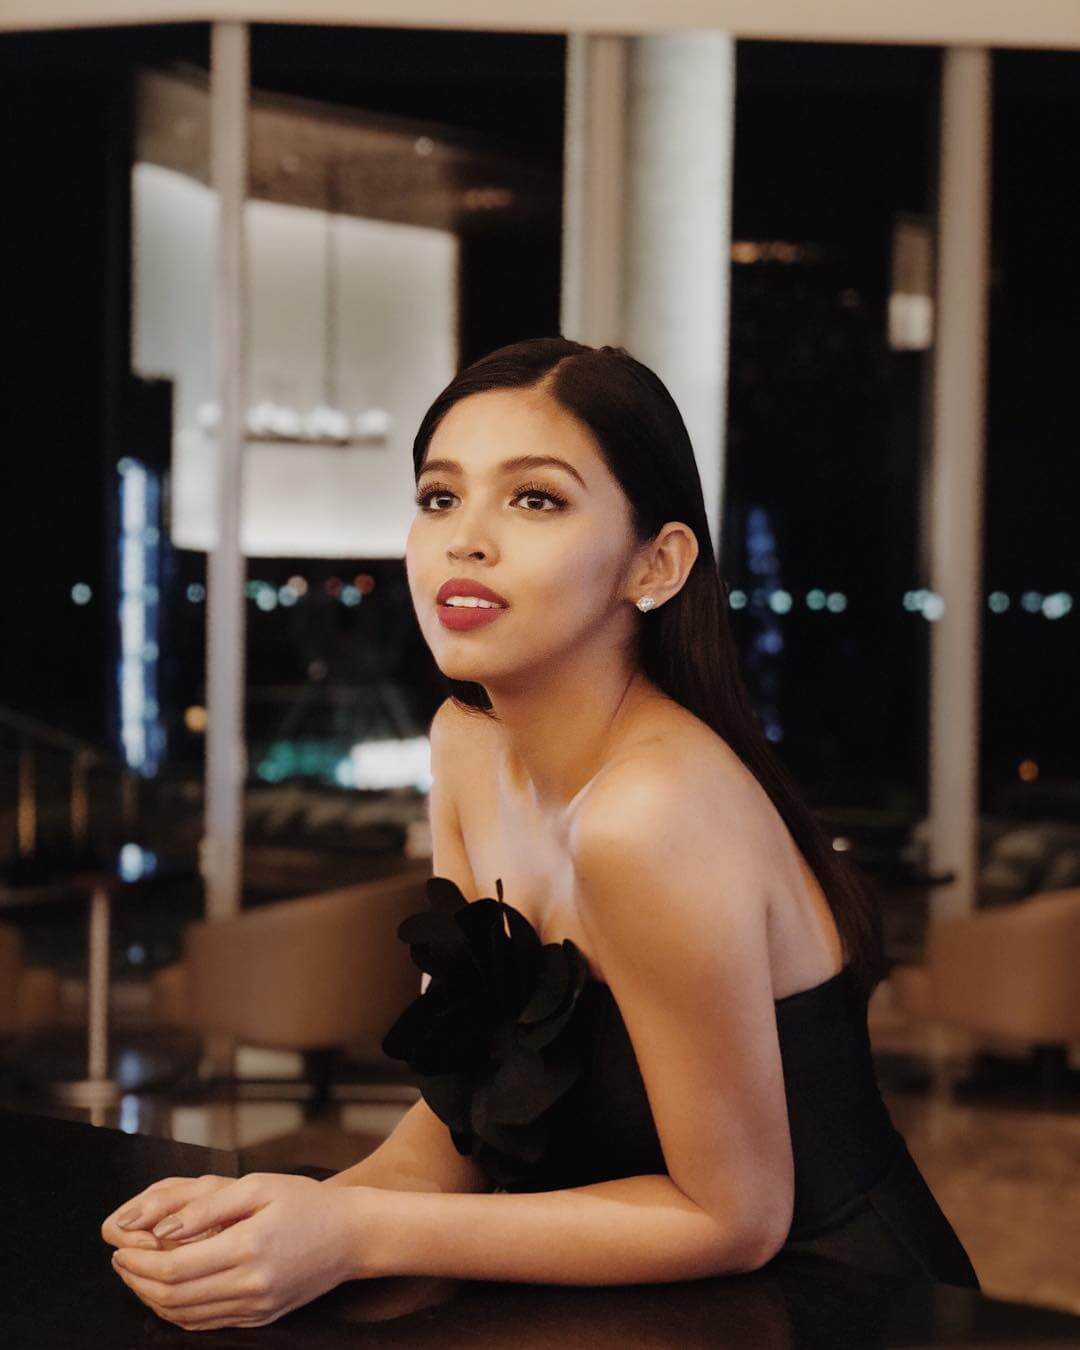 49 Hot Pictures Of Maine Mendoza Which Prove She Is The Sexiest Woman On The Planet | Best Of Comic Books